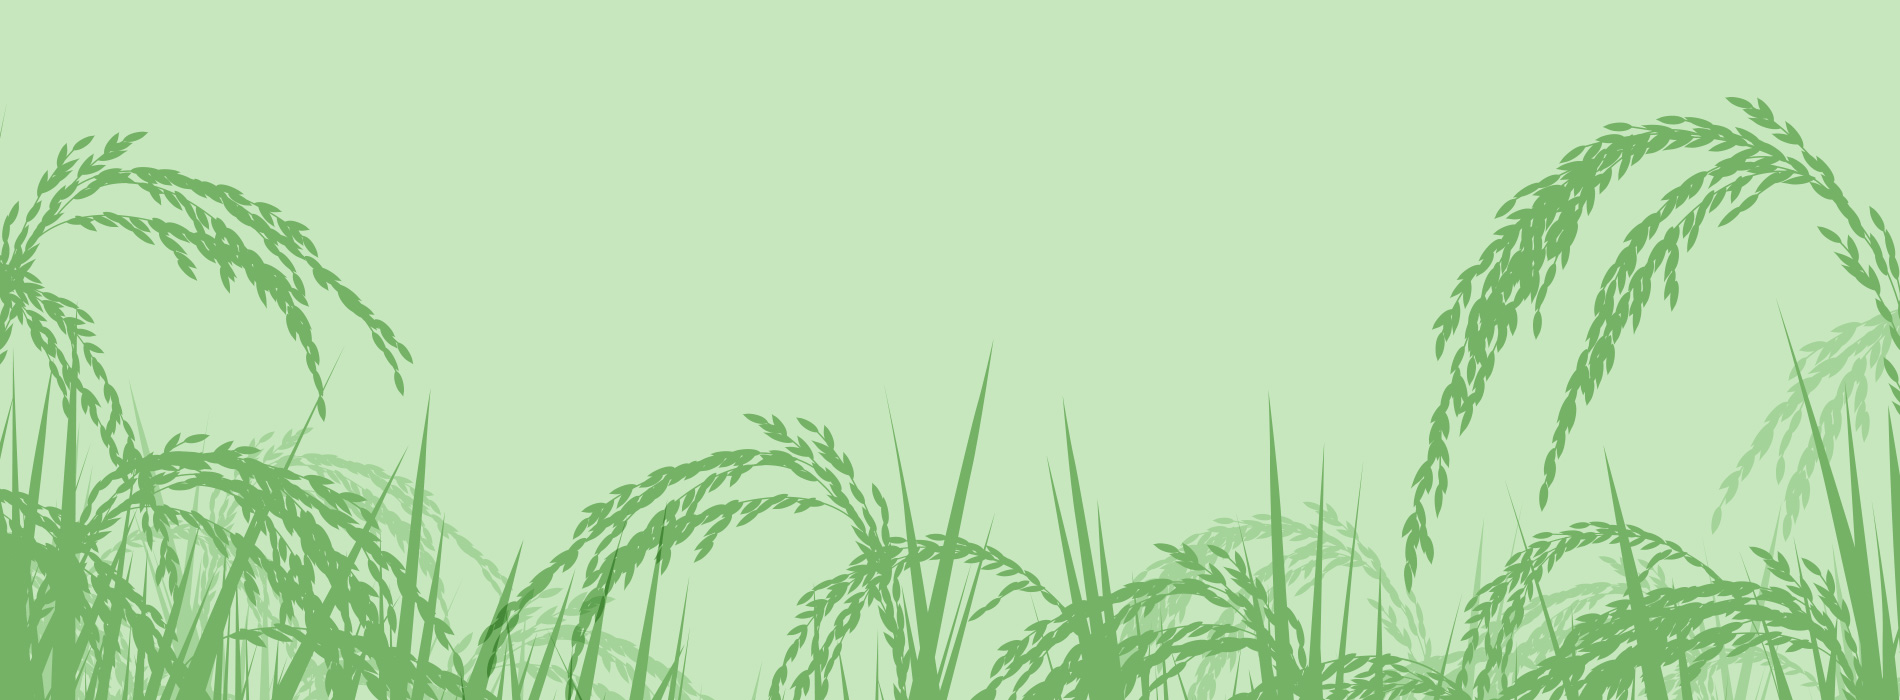 Green background with rice plant silhouettes 